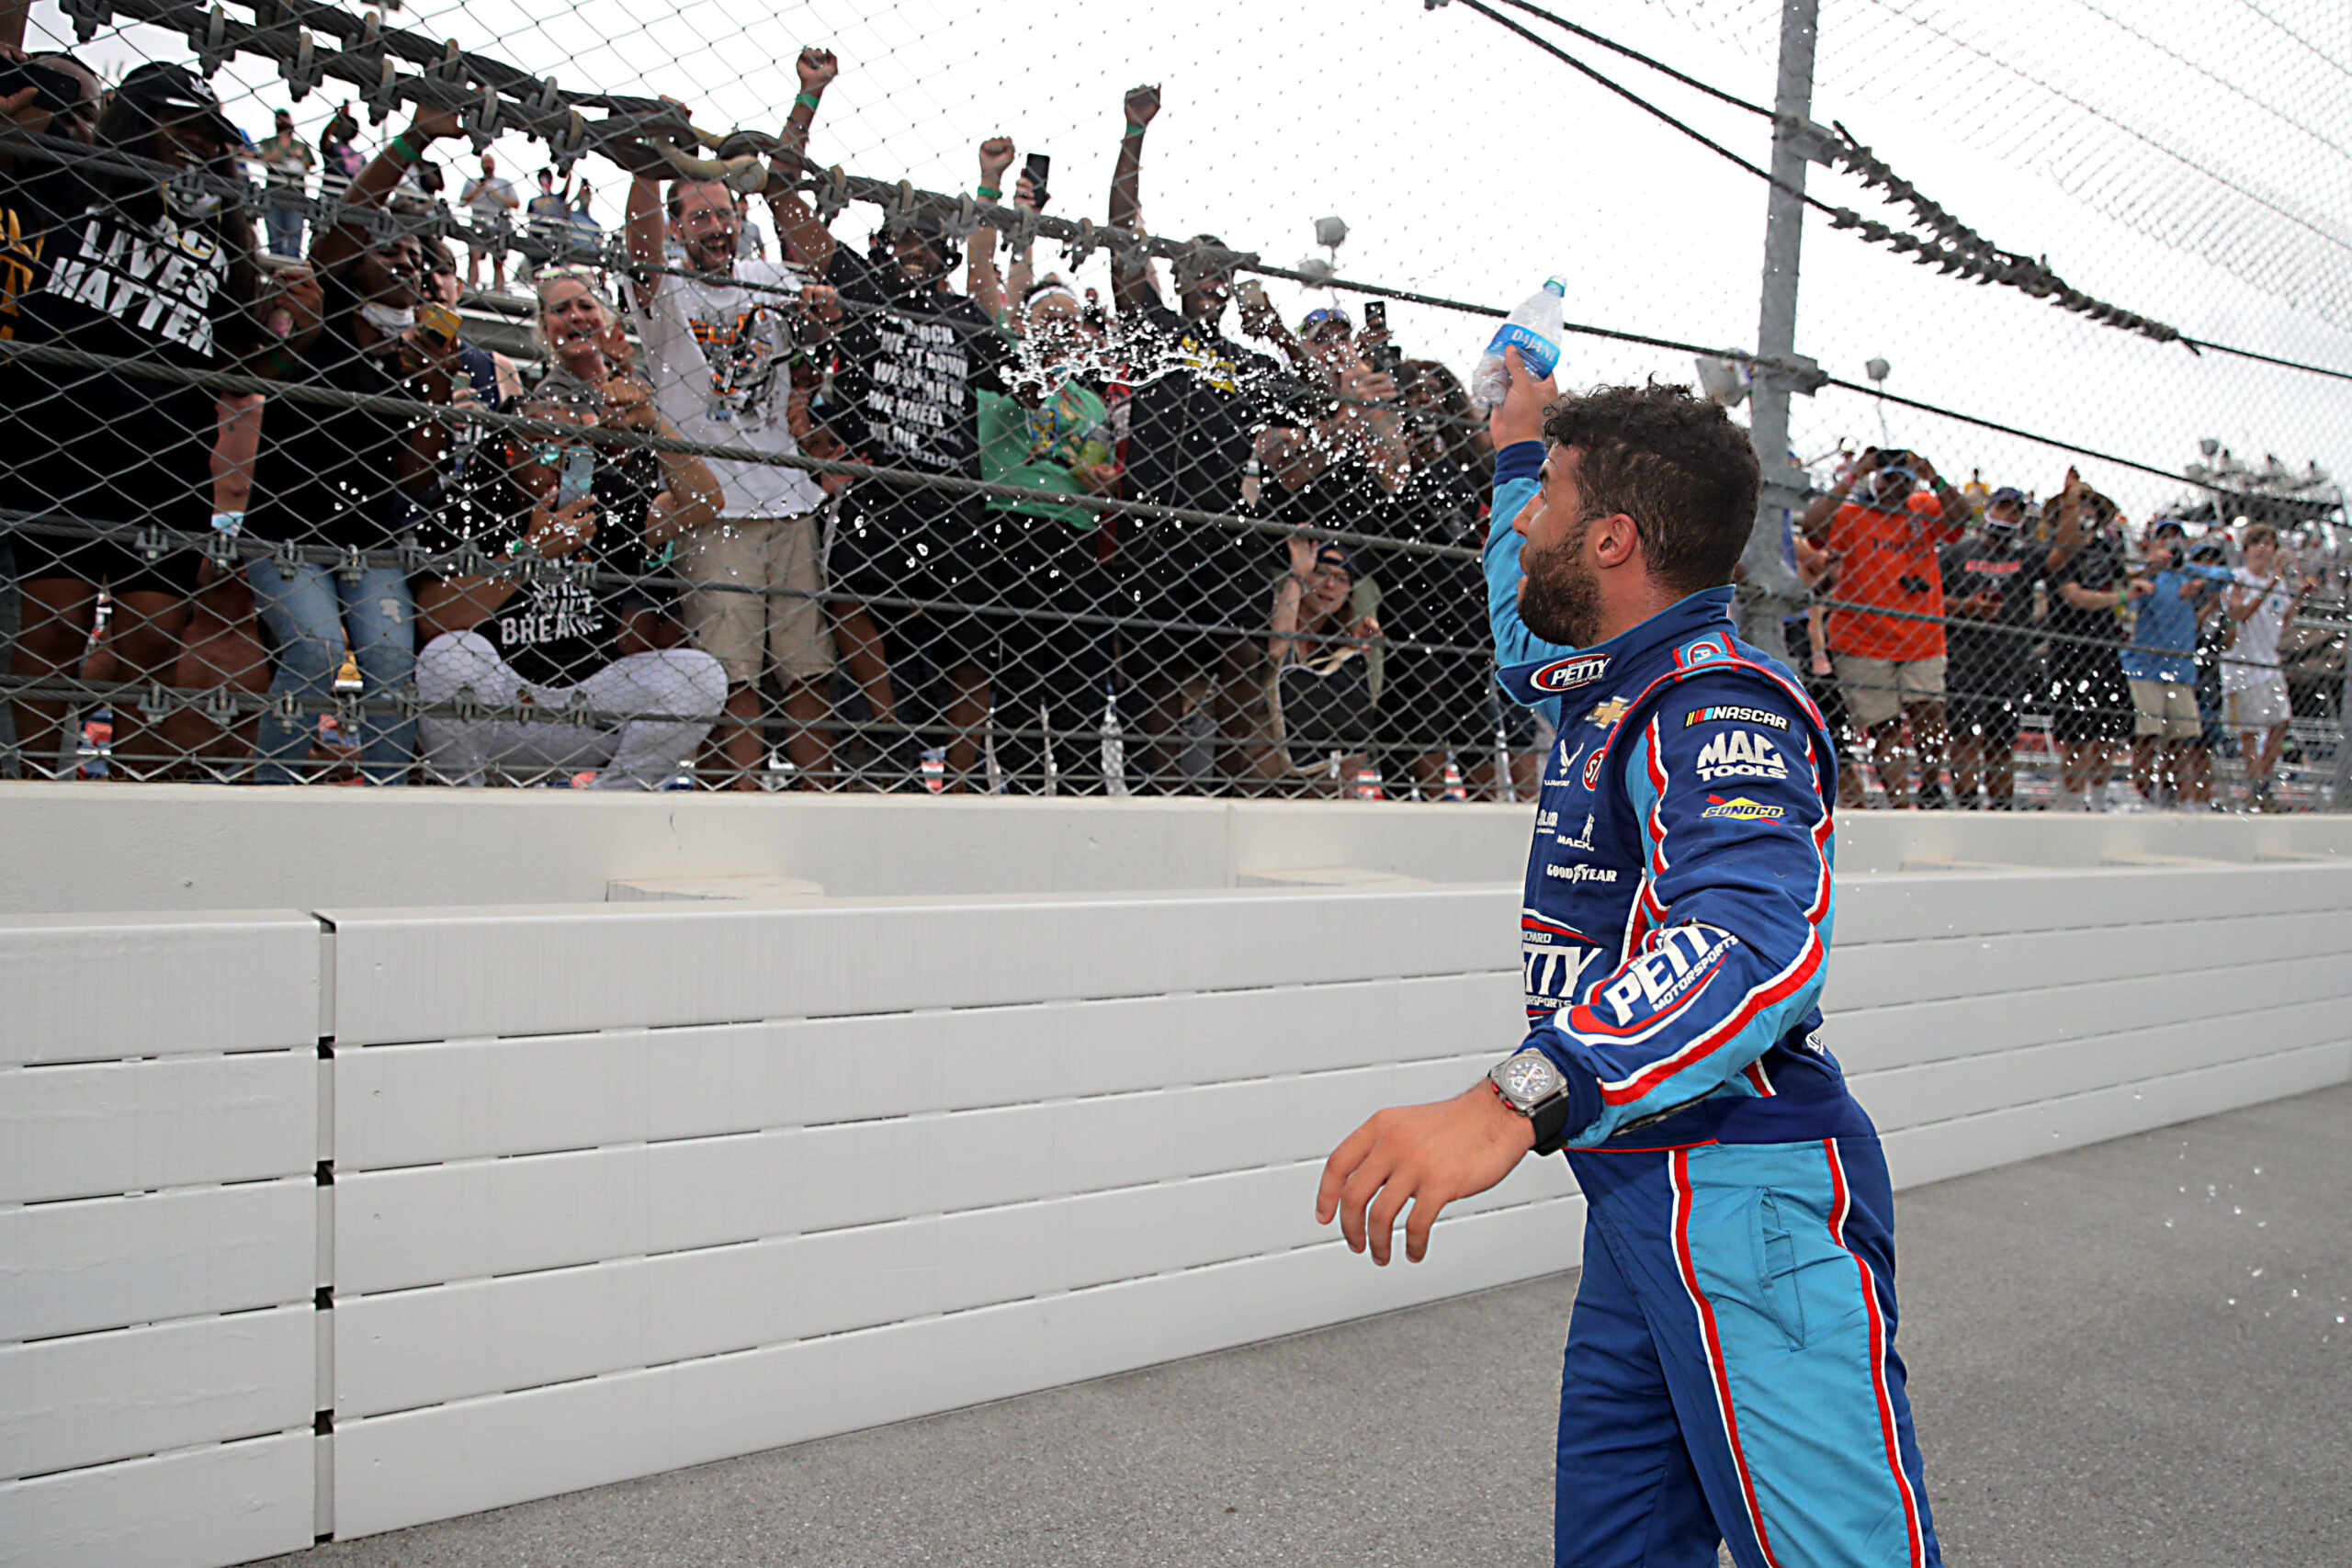 First, could it be Sweet Home(coming) Alabama for Bubba Wallace? (Photo Credit: Chris Graythen/Getty Images)